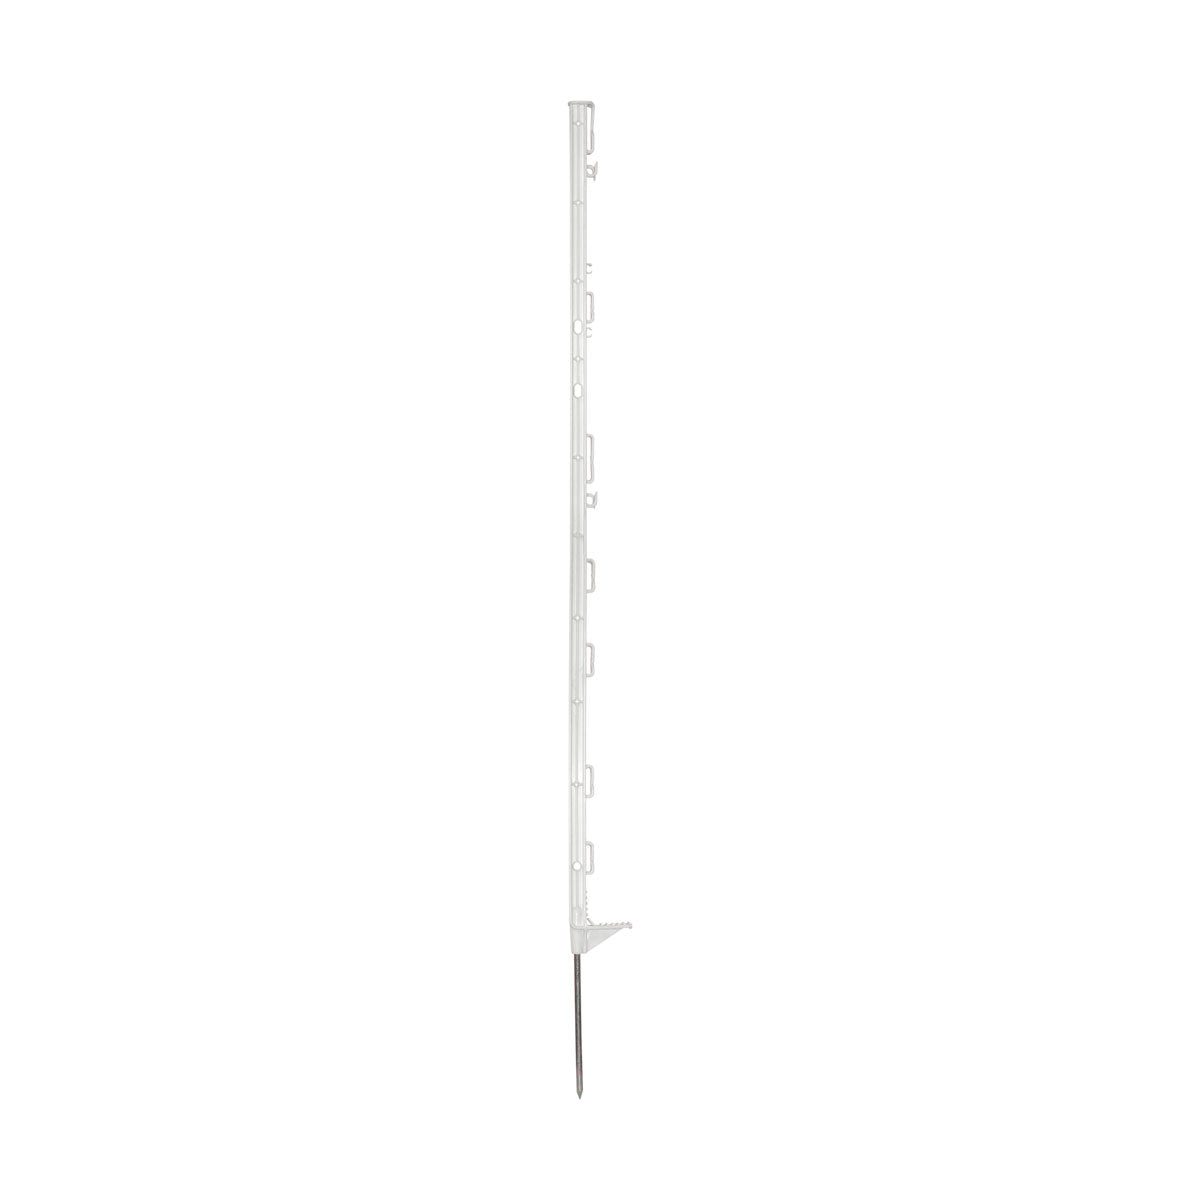 Agrifence Easypost (H4784) Pack of 10 Electric Fencing Posts Barnstaple Equestrian Supplies